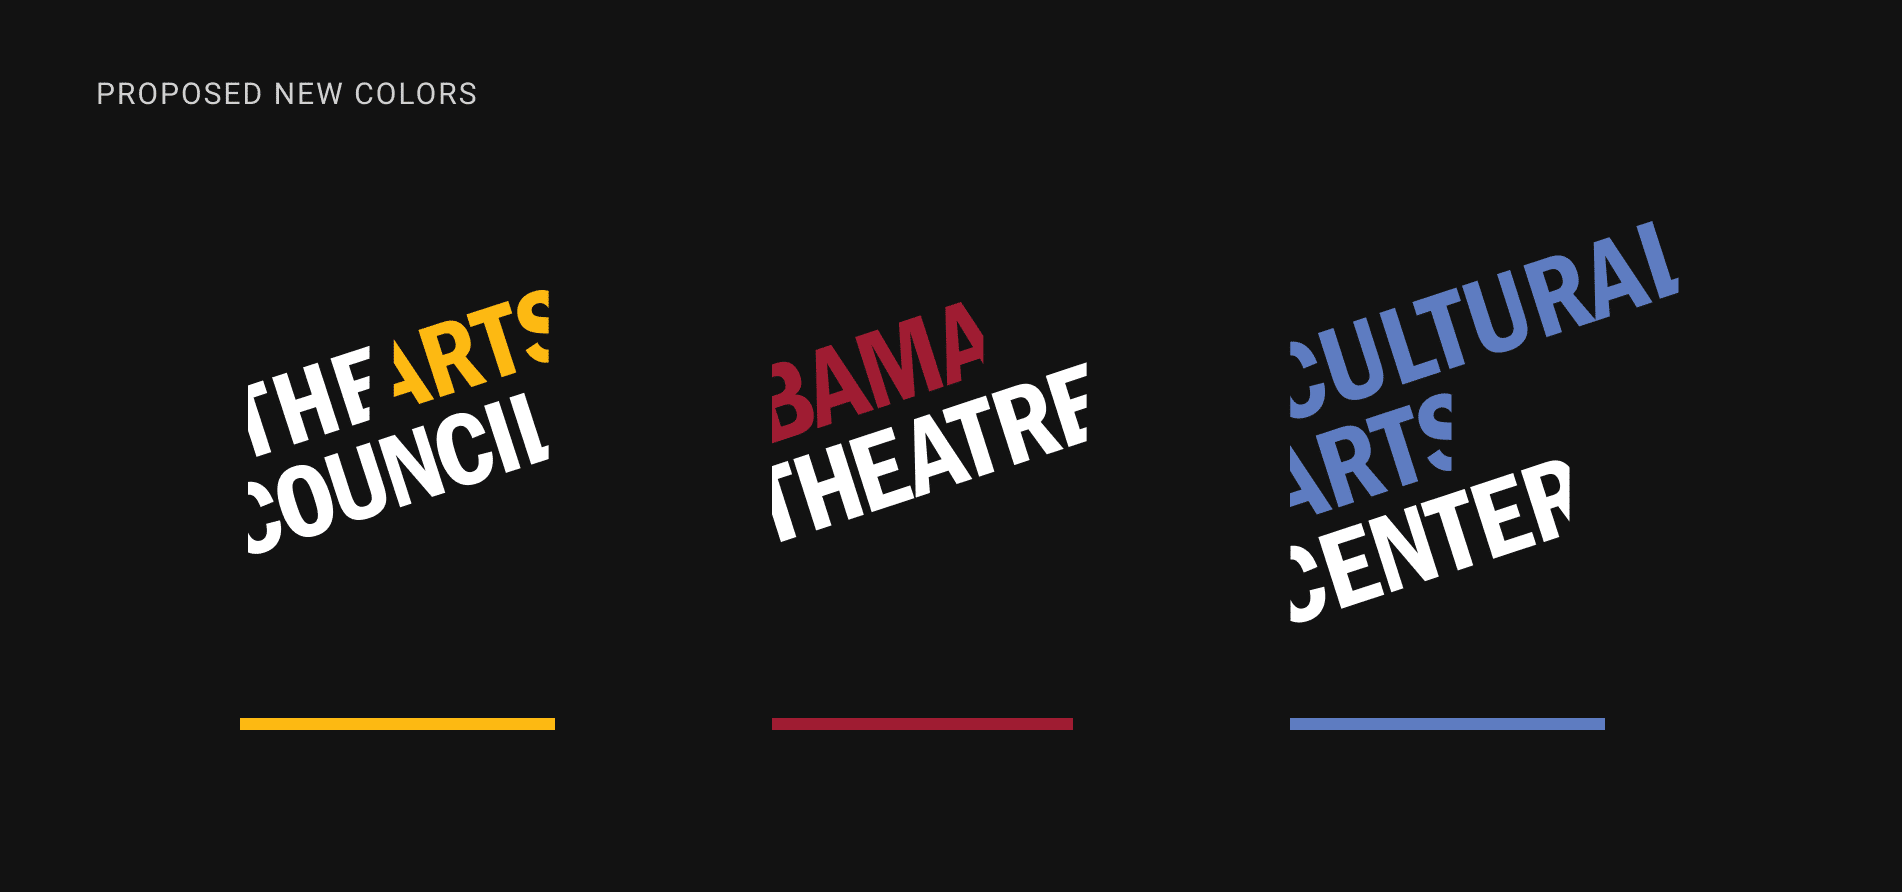 Graphic showing proposed new colors for TuscArts website project